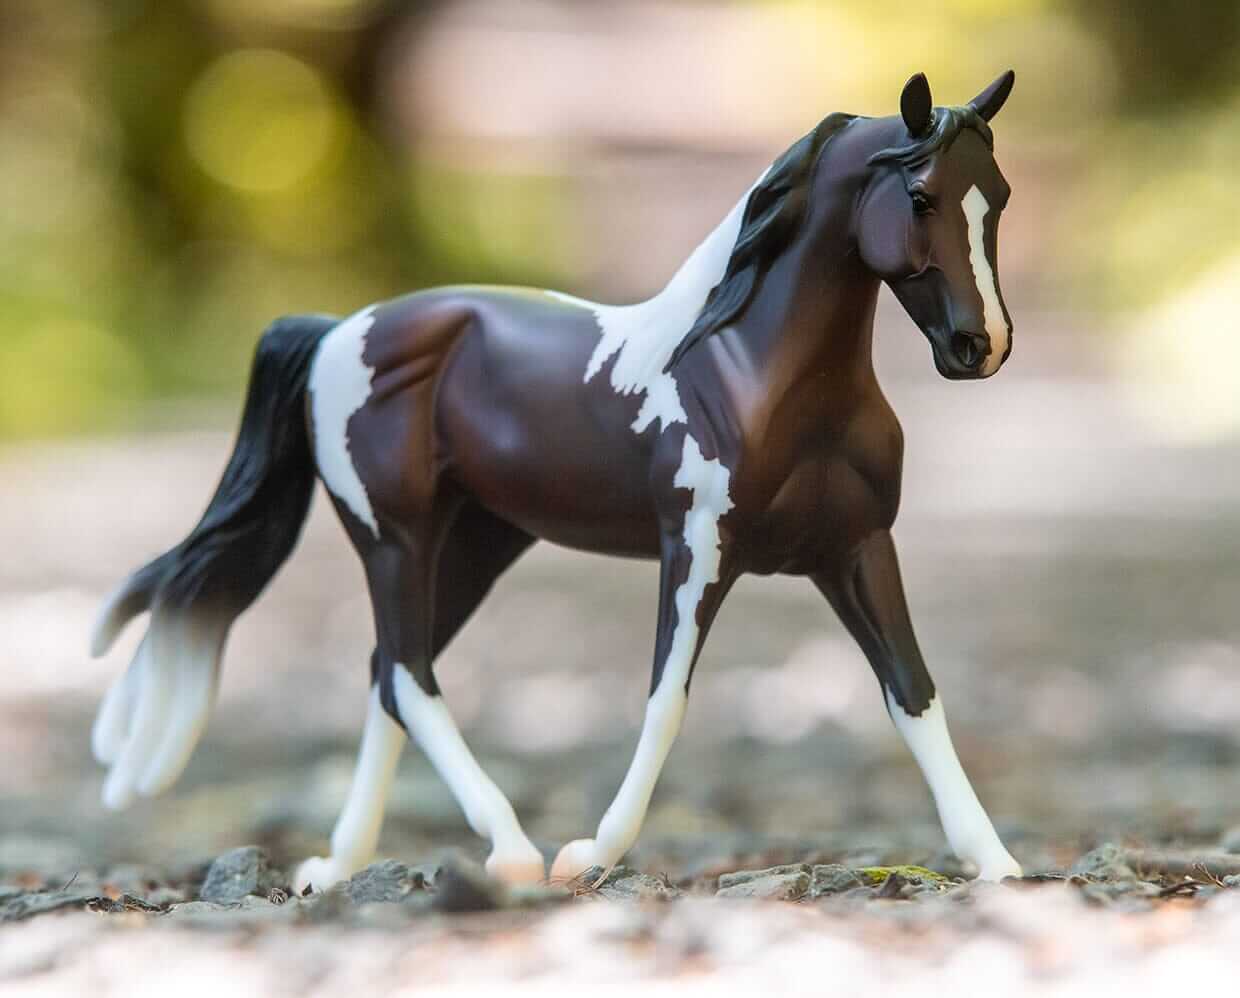 Breyer Pinto model with scenic background